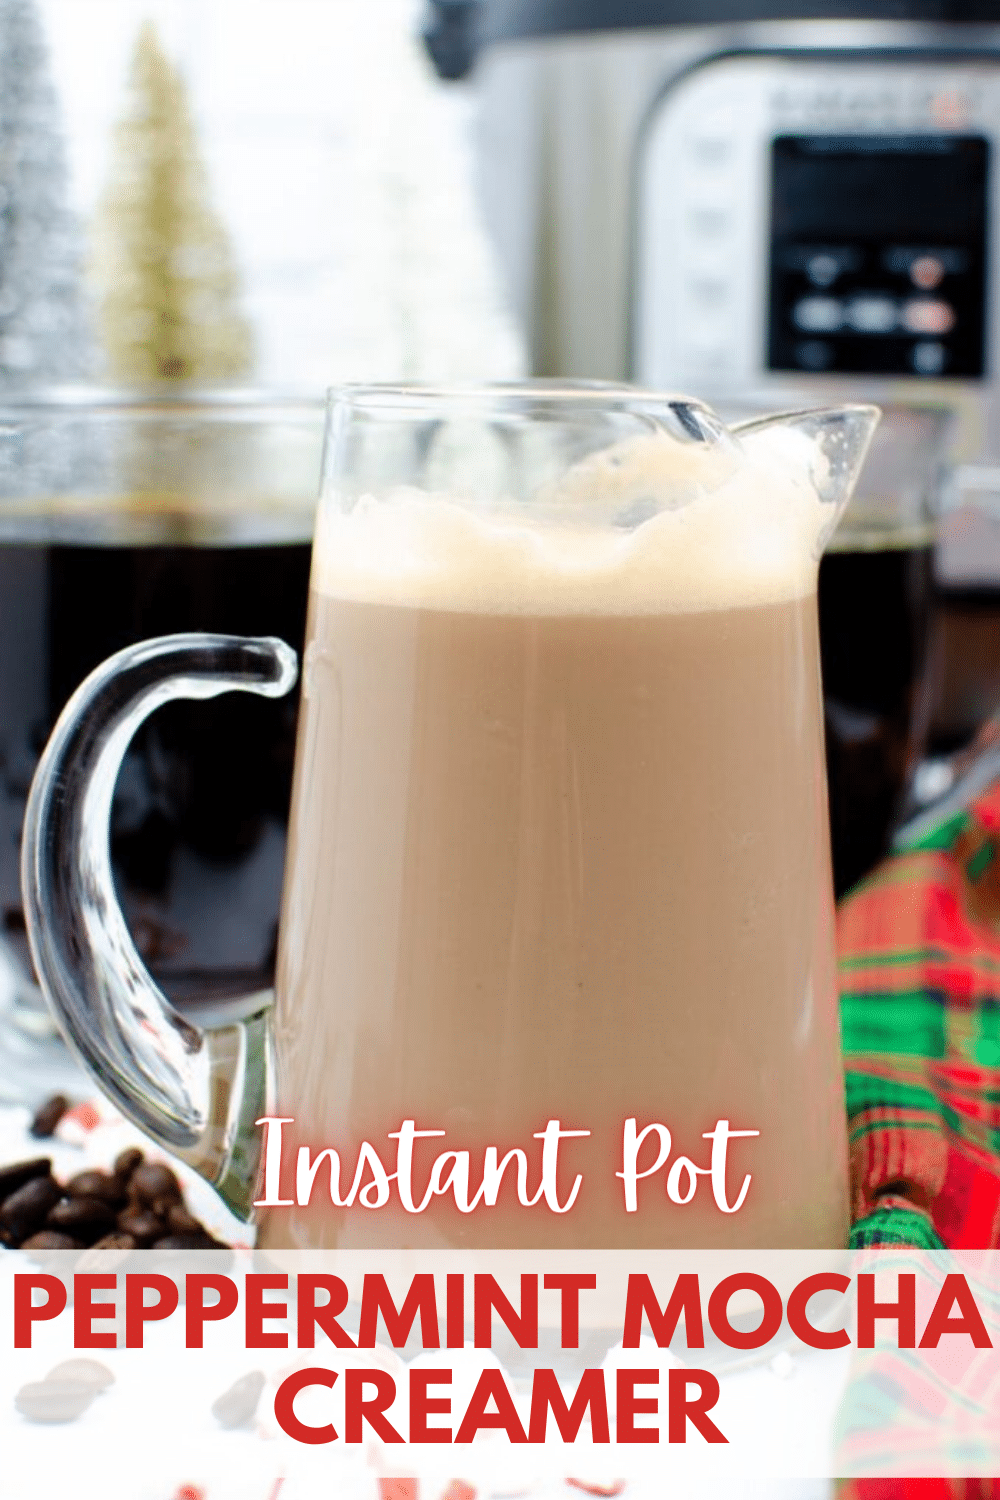 This recipe for Peppermint Mocha Creamer is so easy and takes no time at all if you have an Instant Pot! #coffeelovers #peppermintmocha #instantpot #DIYchristmasgift via @wondermomwannab